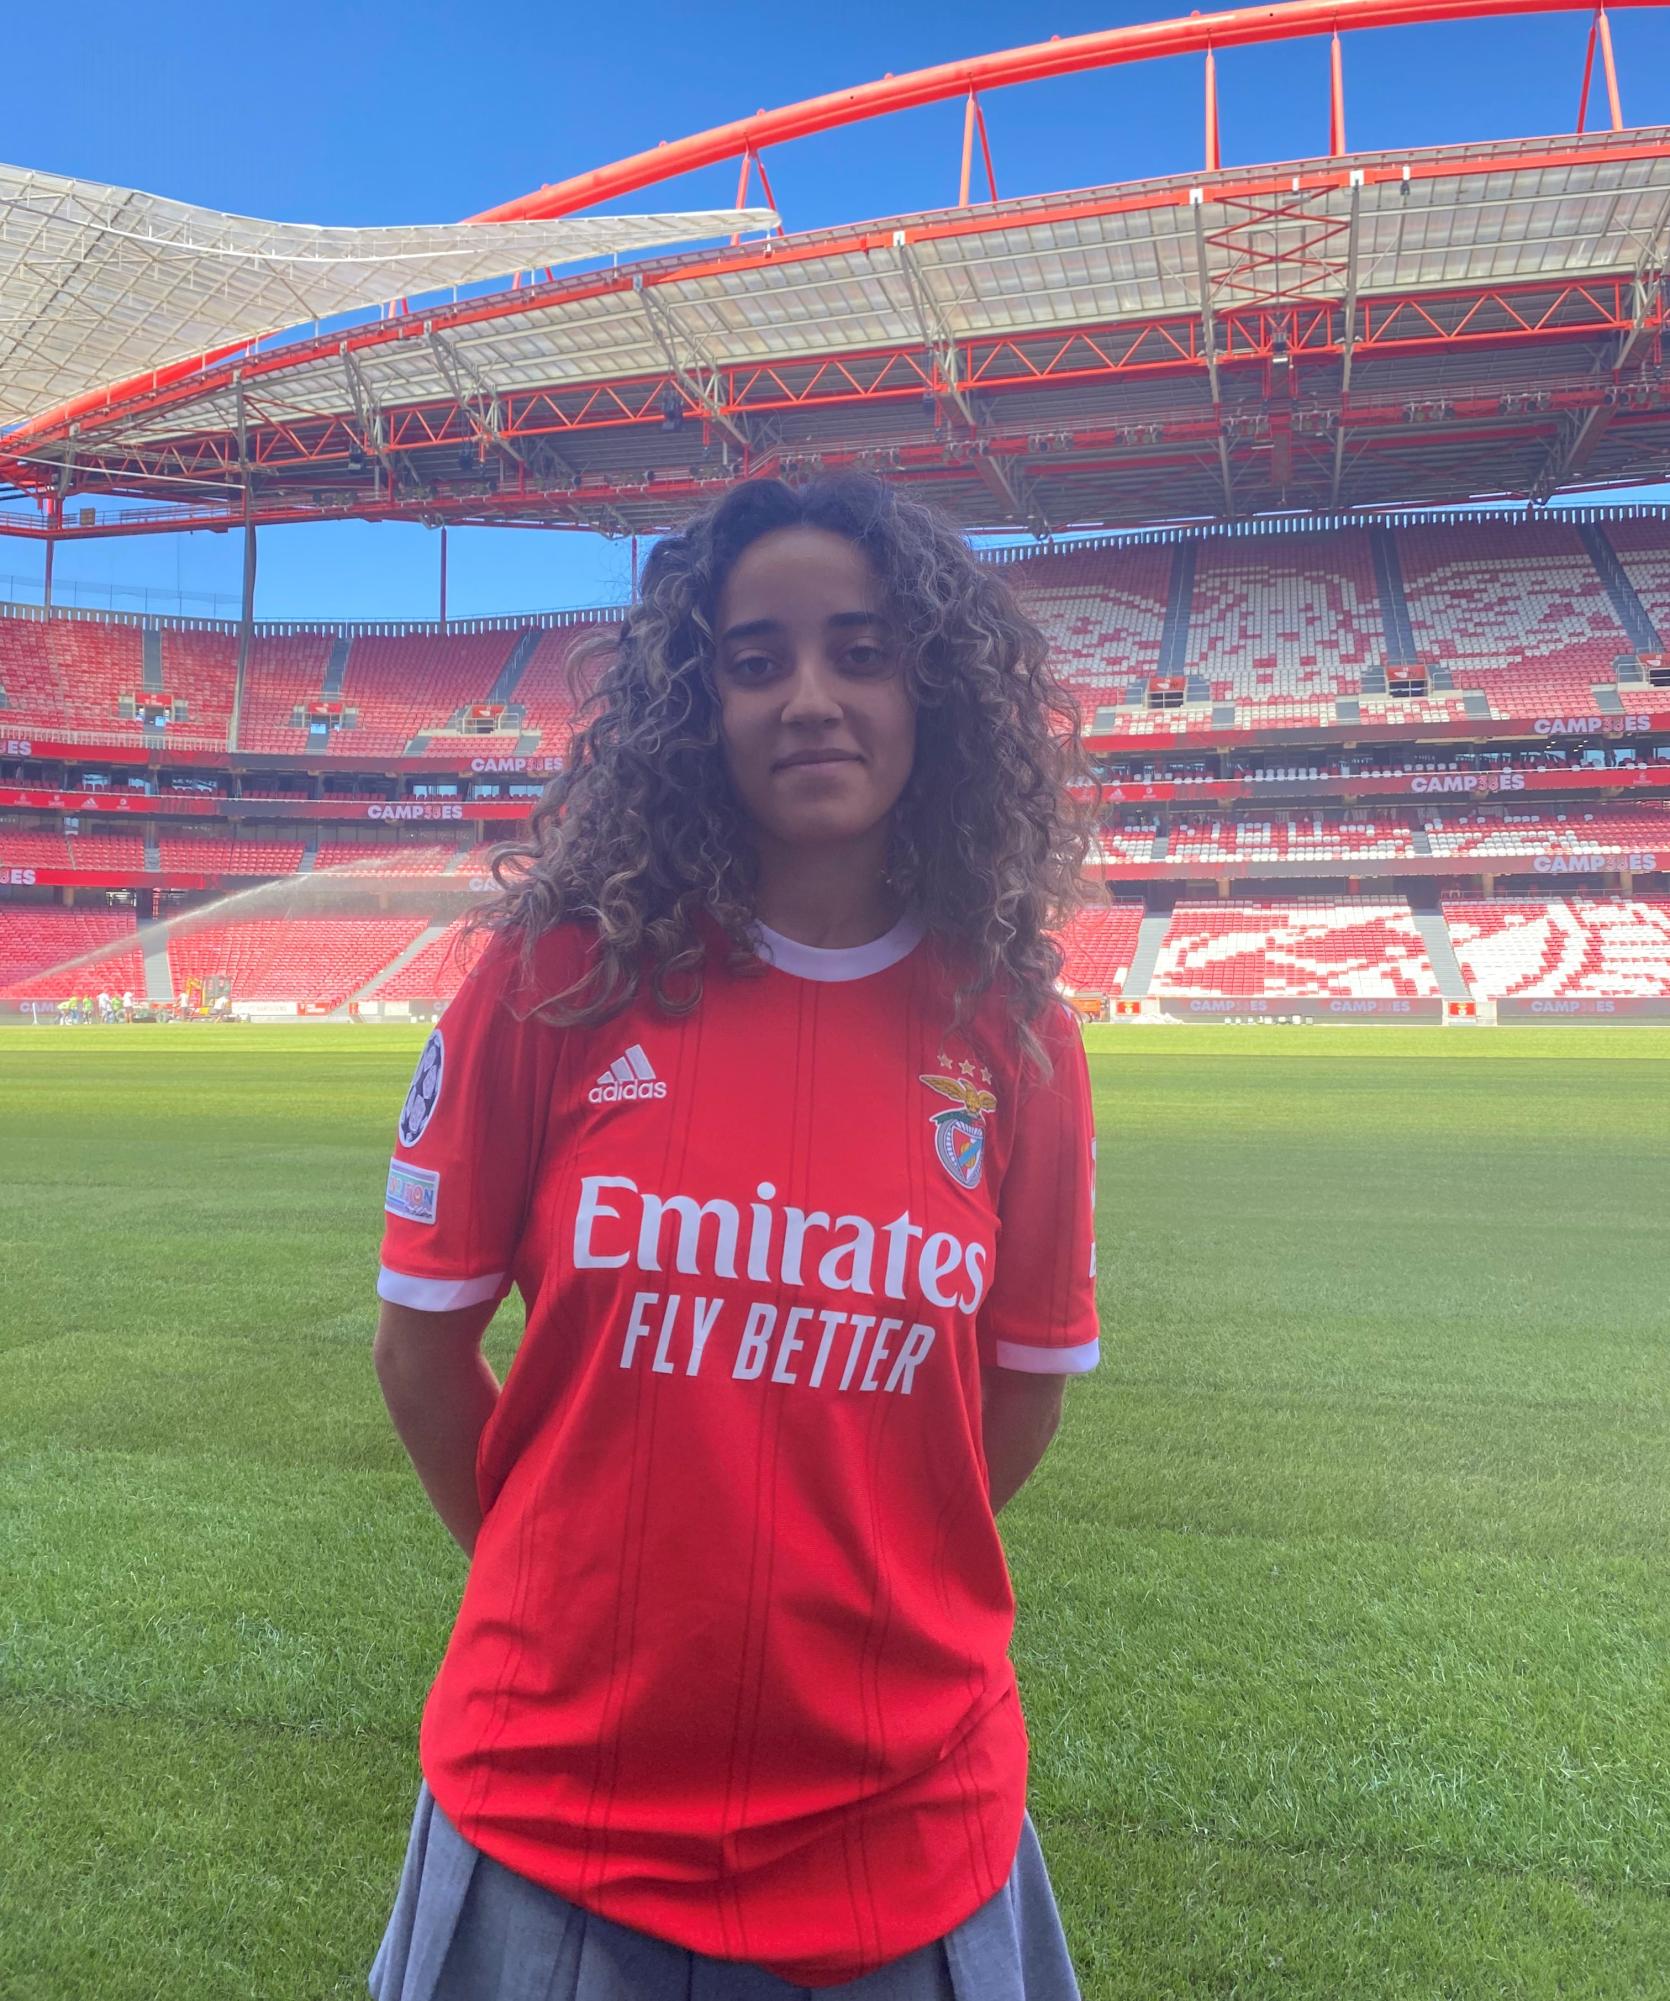 The author poses on the field at Estádio da Luz, home of S.L. Benfica in Lisbon.